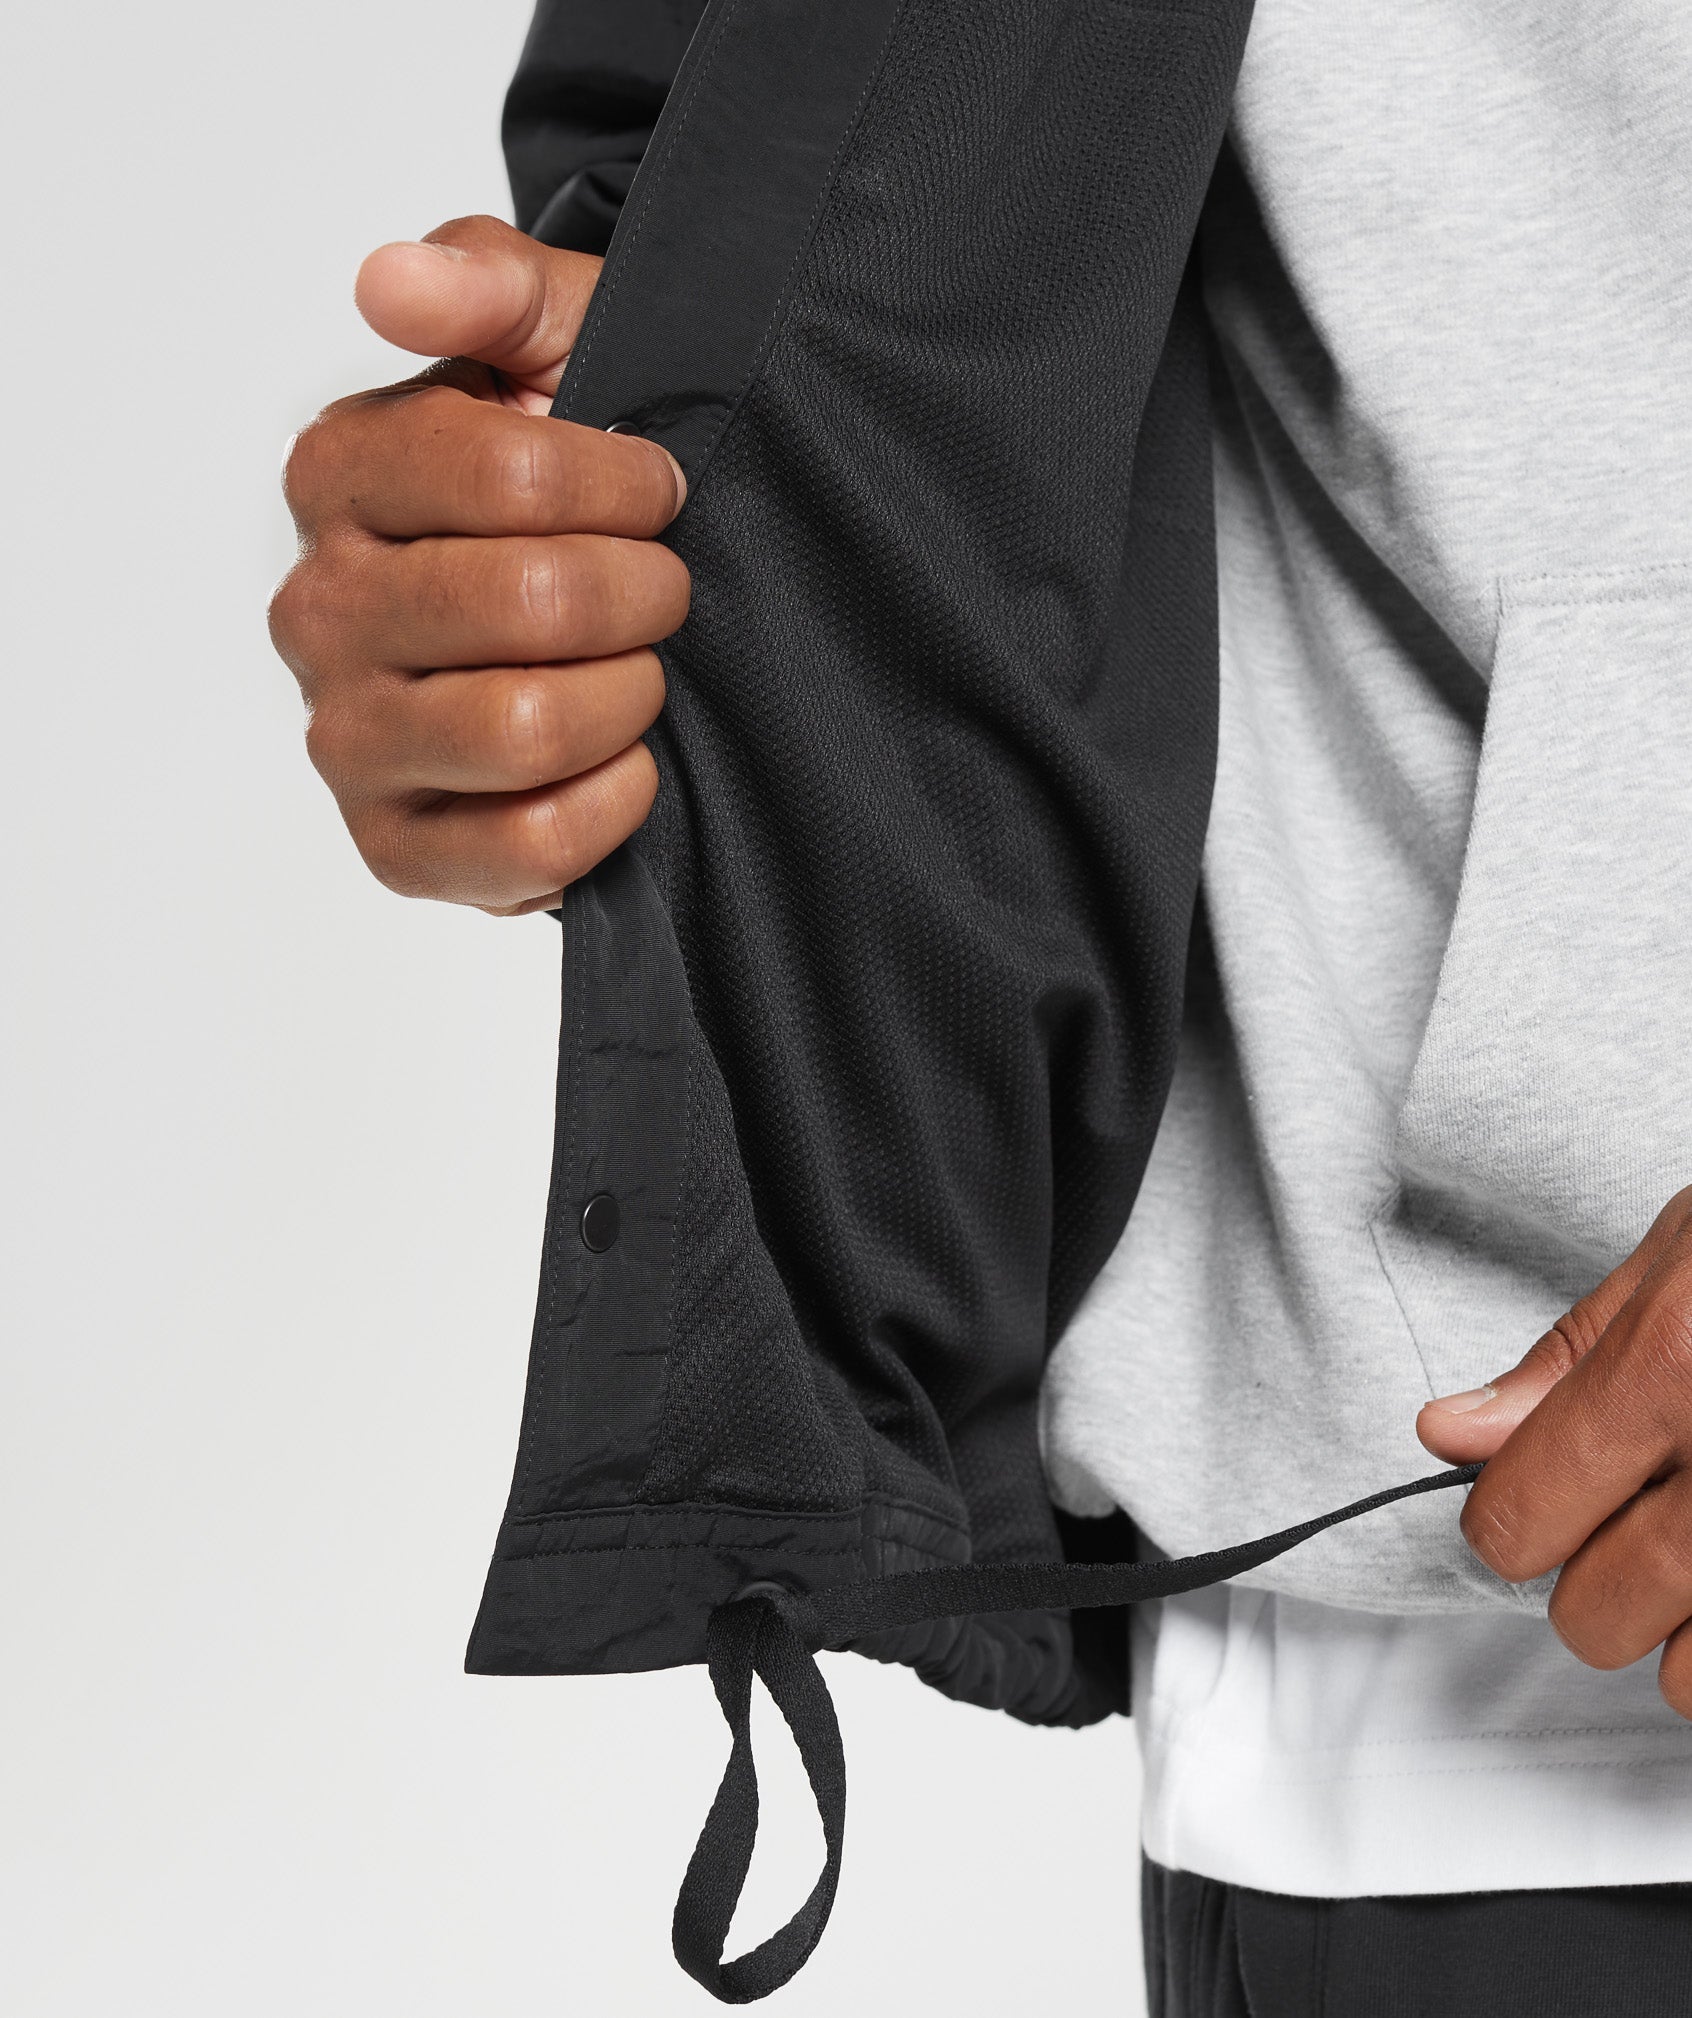 Rest Day Commute Jacket in Black - view 6